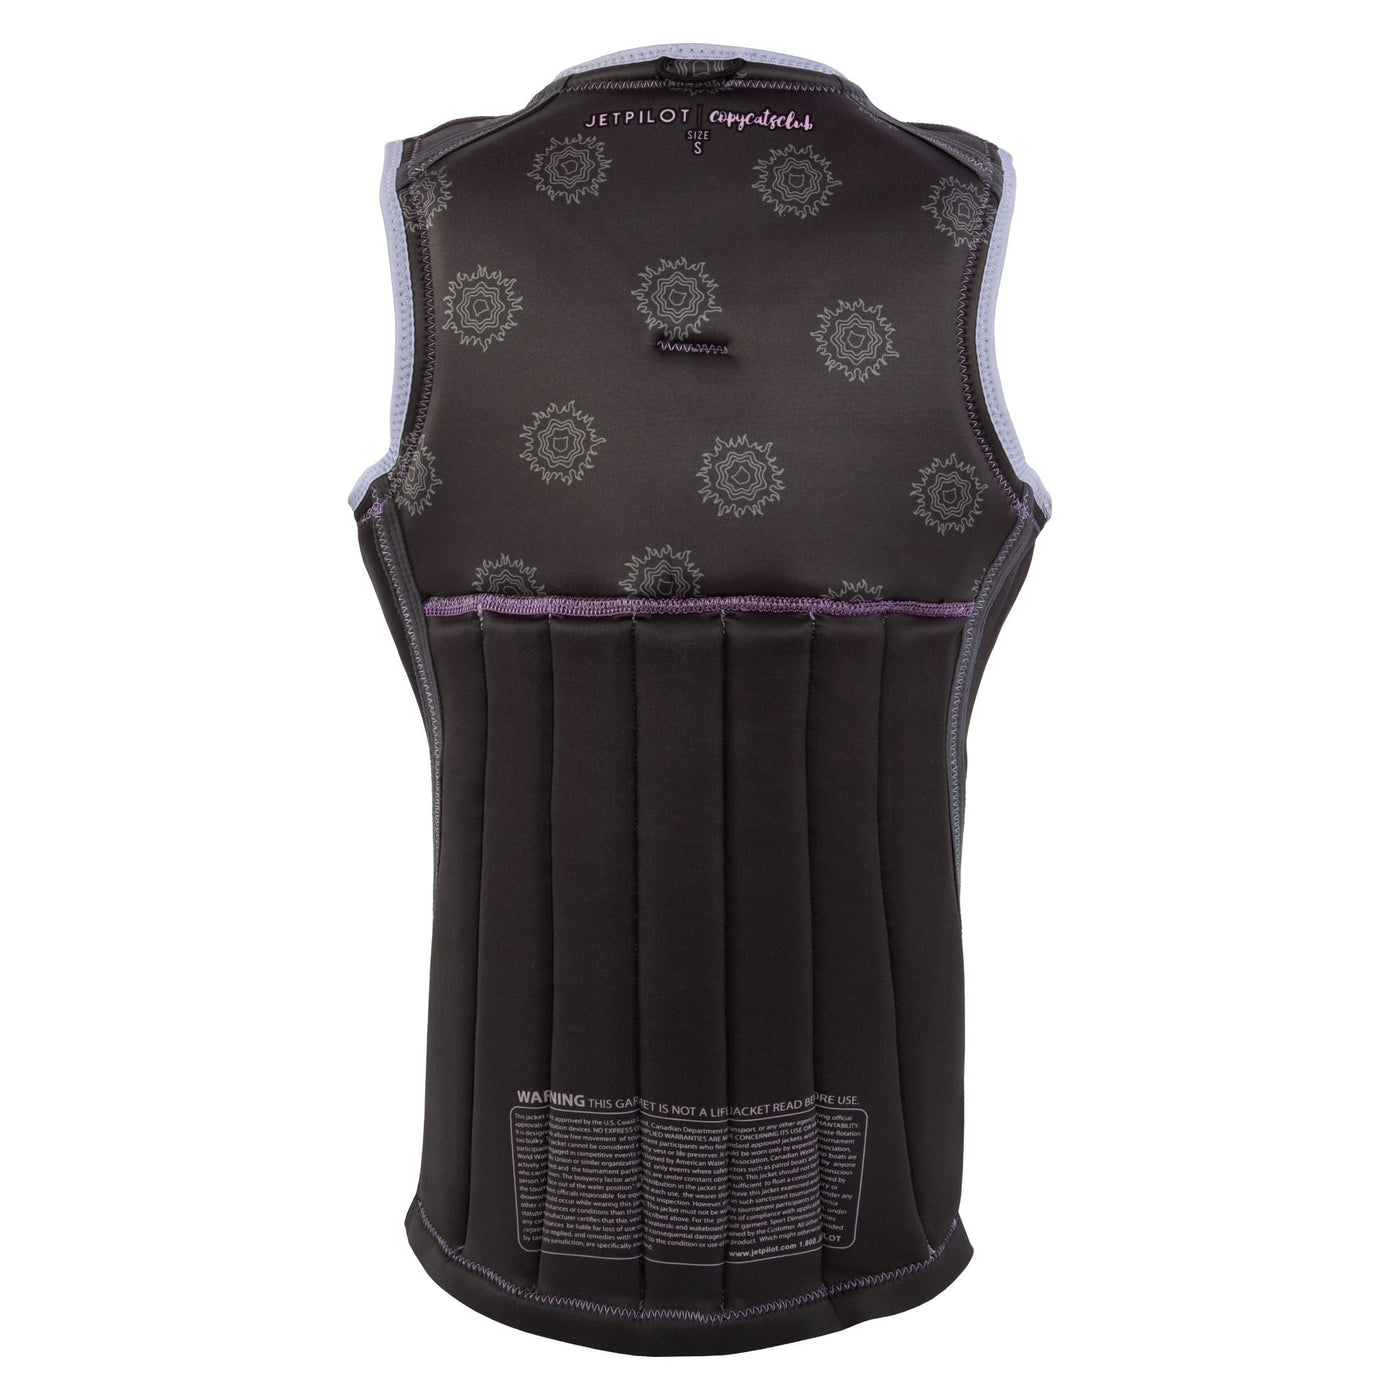 Reverse back view of the Copycat Club comp vest in the Lavender colorway.